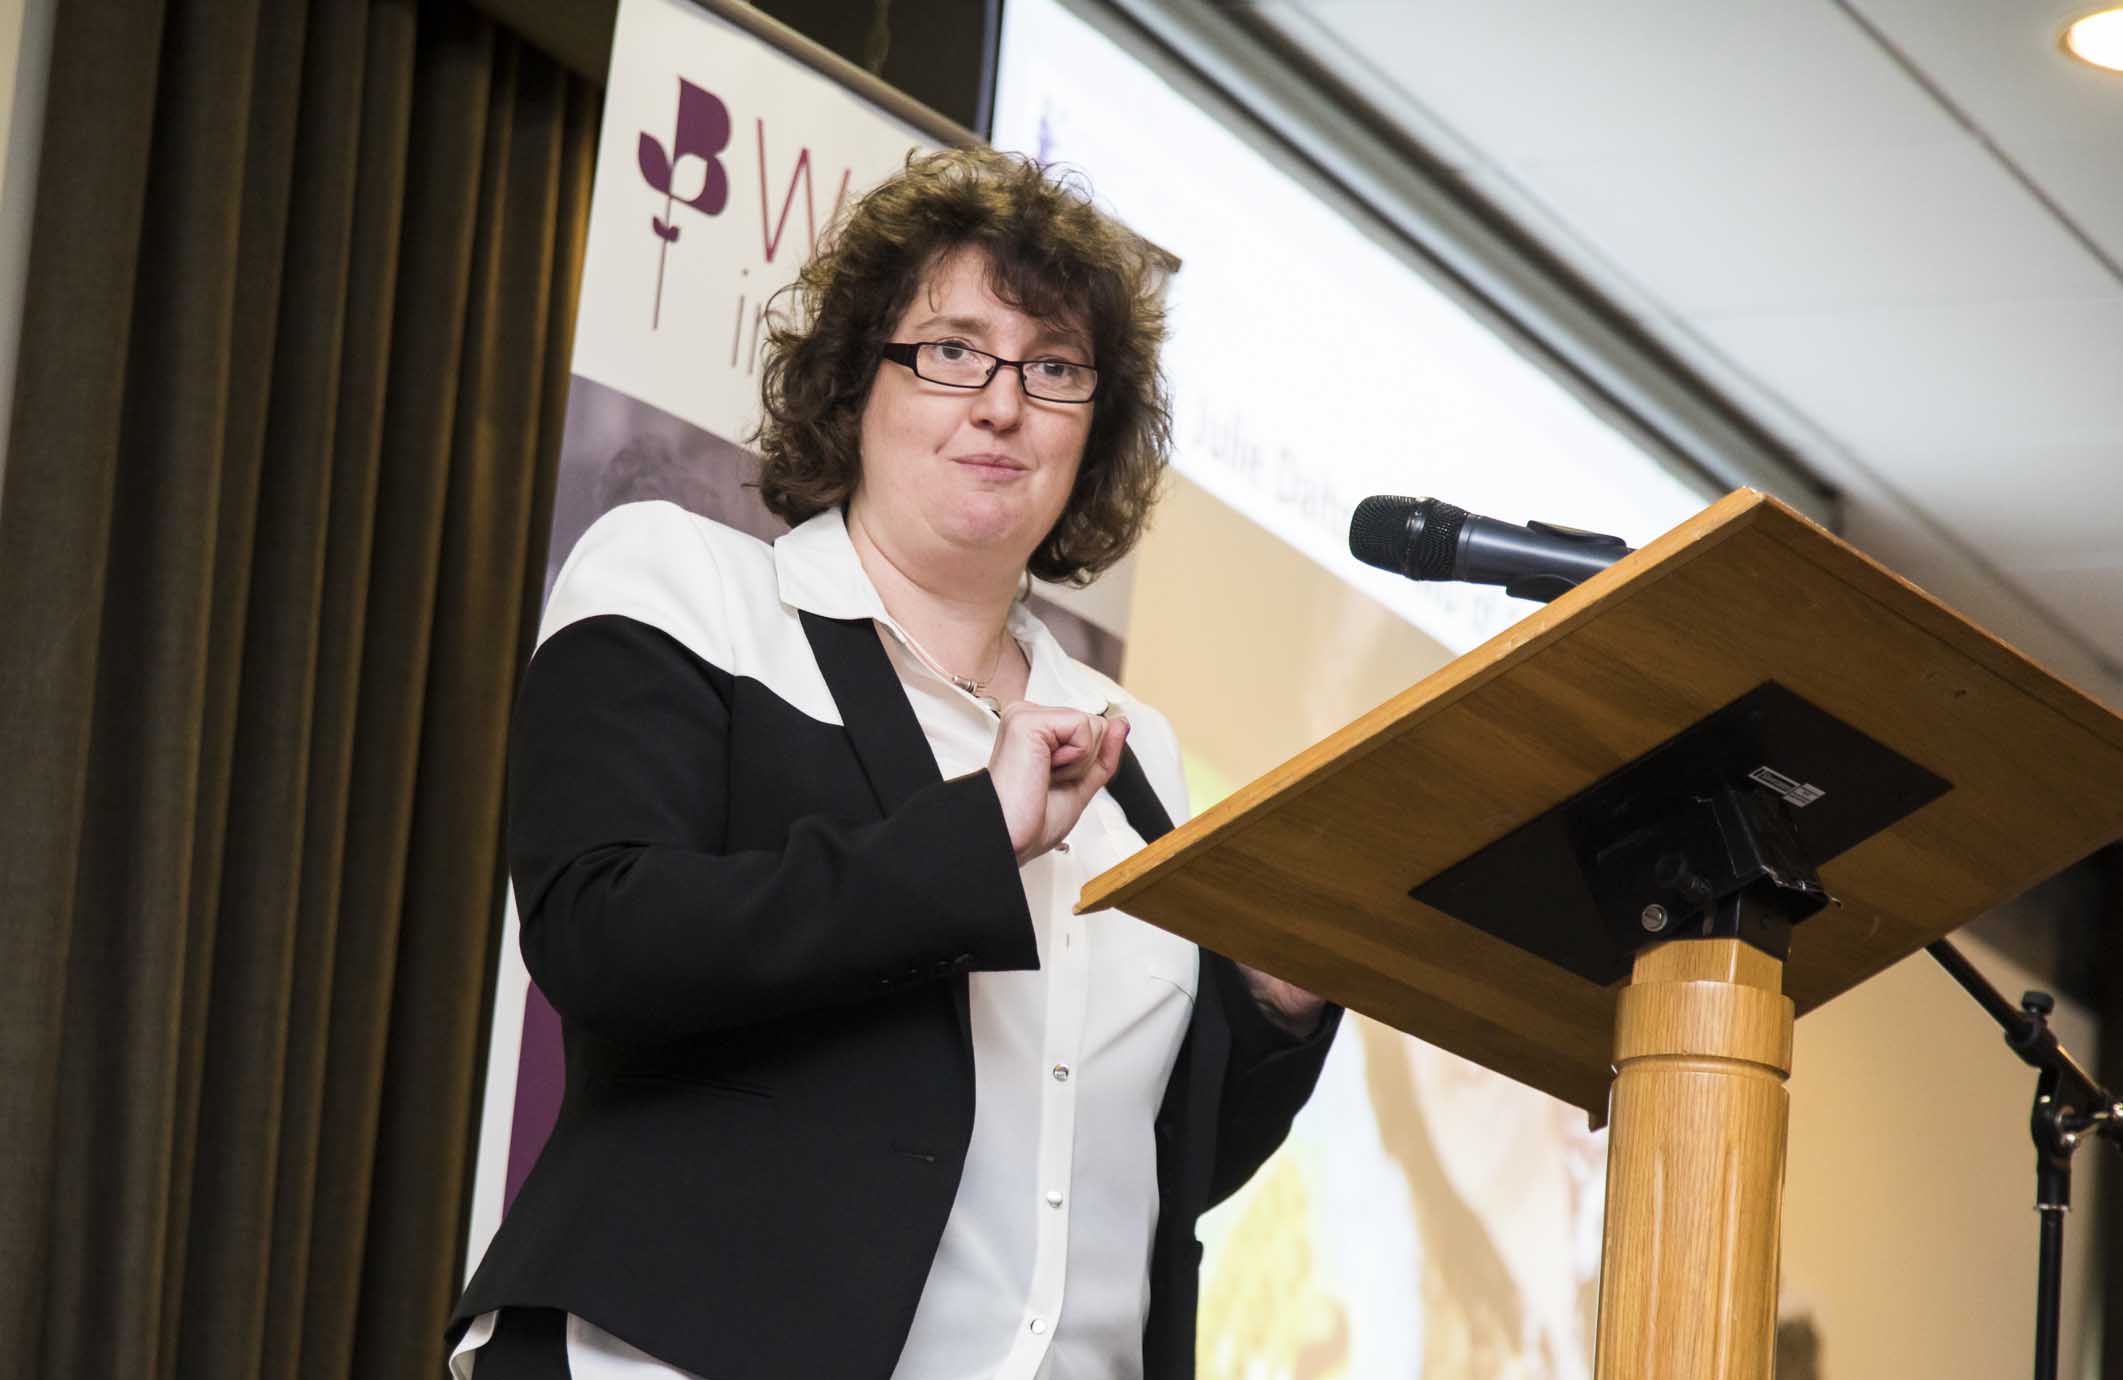 Gulliver’s Managing Director gives inspirational IWD speech in Yorkshire